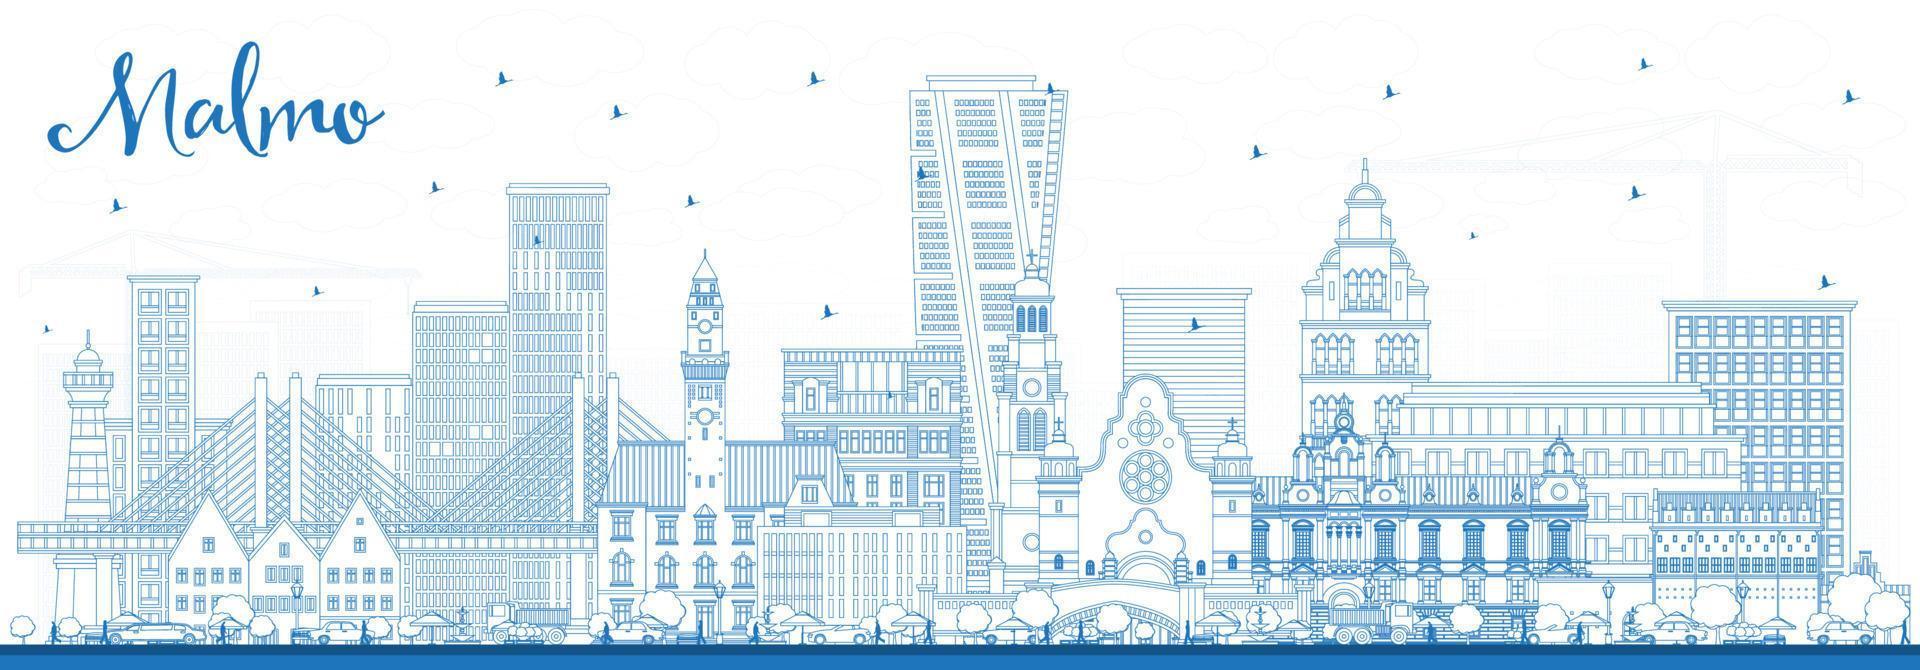 Outline Malmo Sweden City Skyline with Blue Buildings. vector